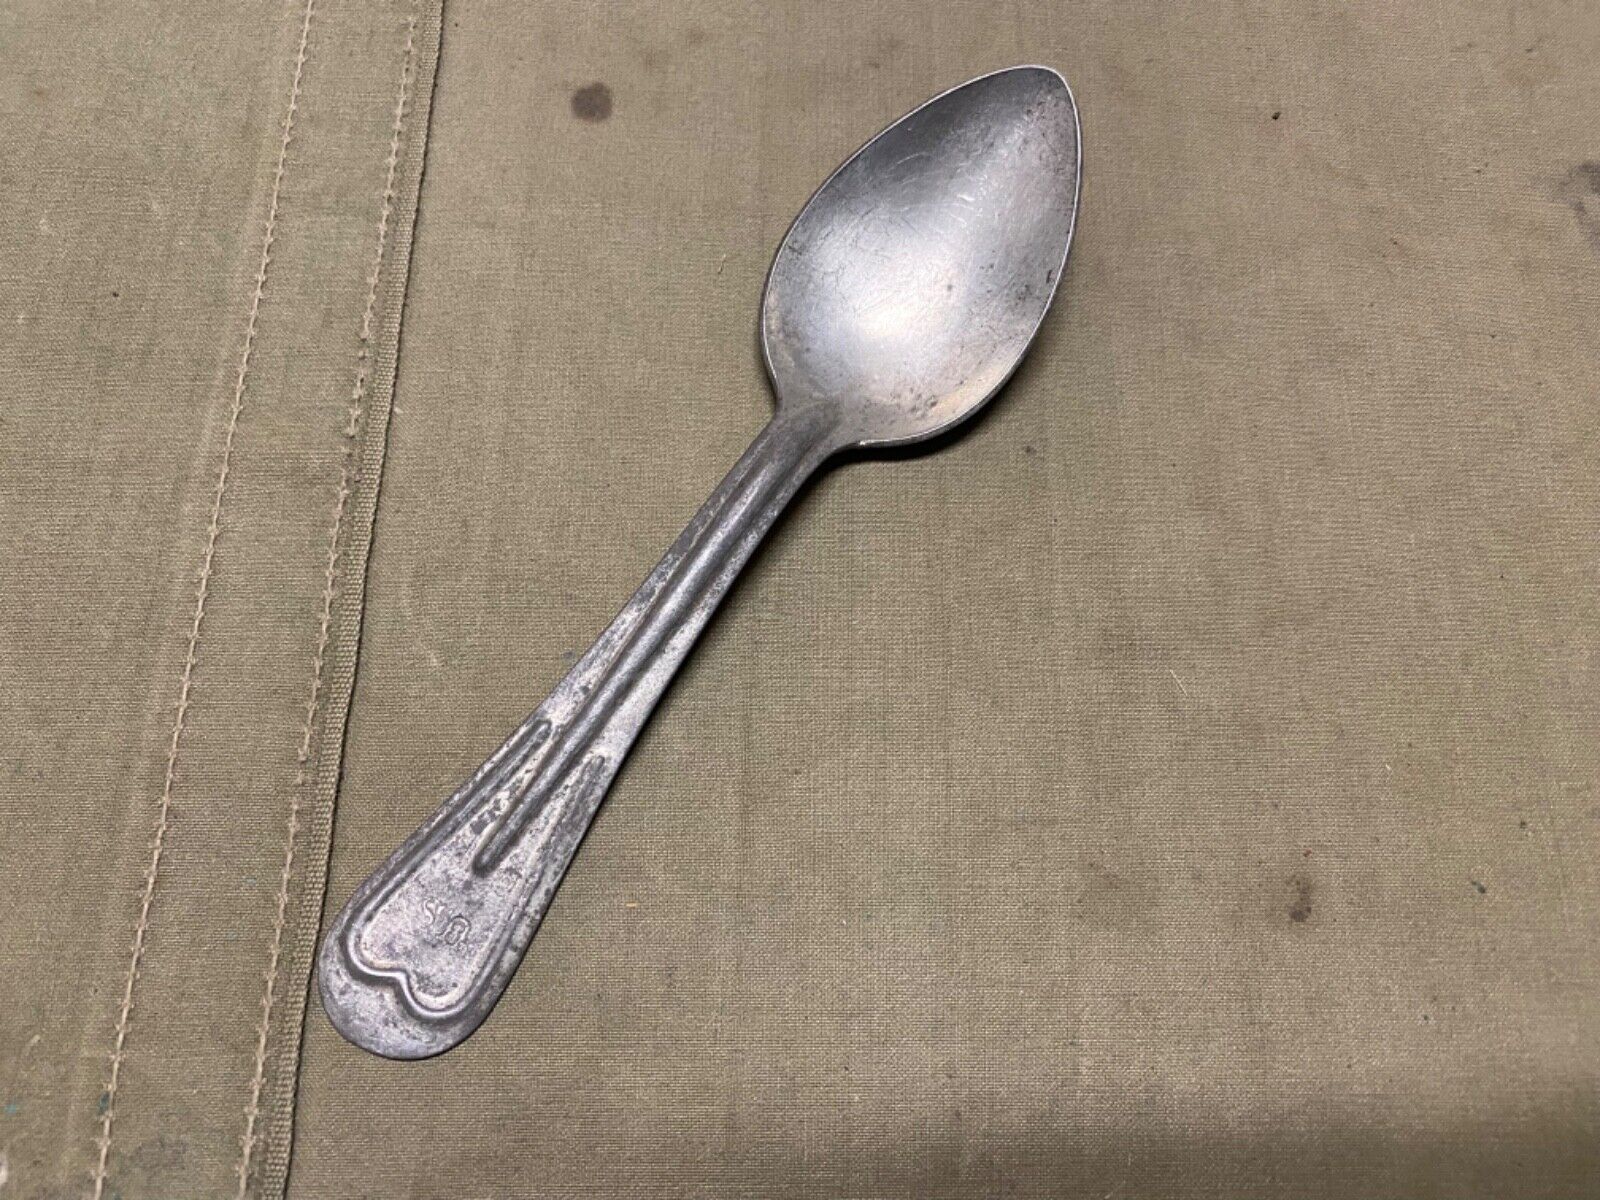 ORIGINAL WWI WWII US ARMY M1910 MESS KIT SPOON UTENSIL-DATED 1918